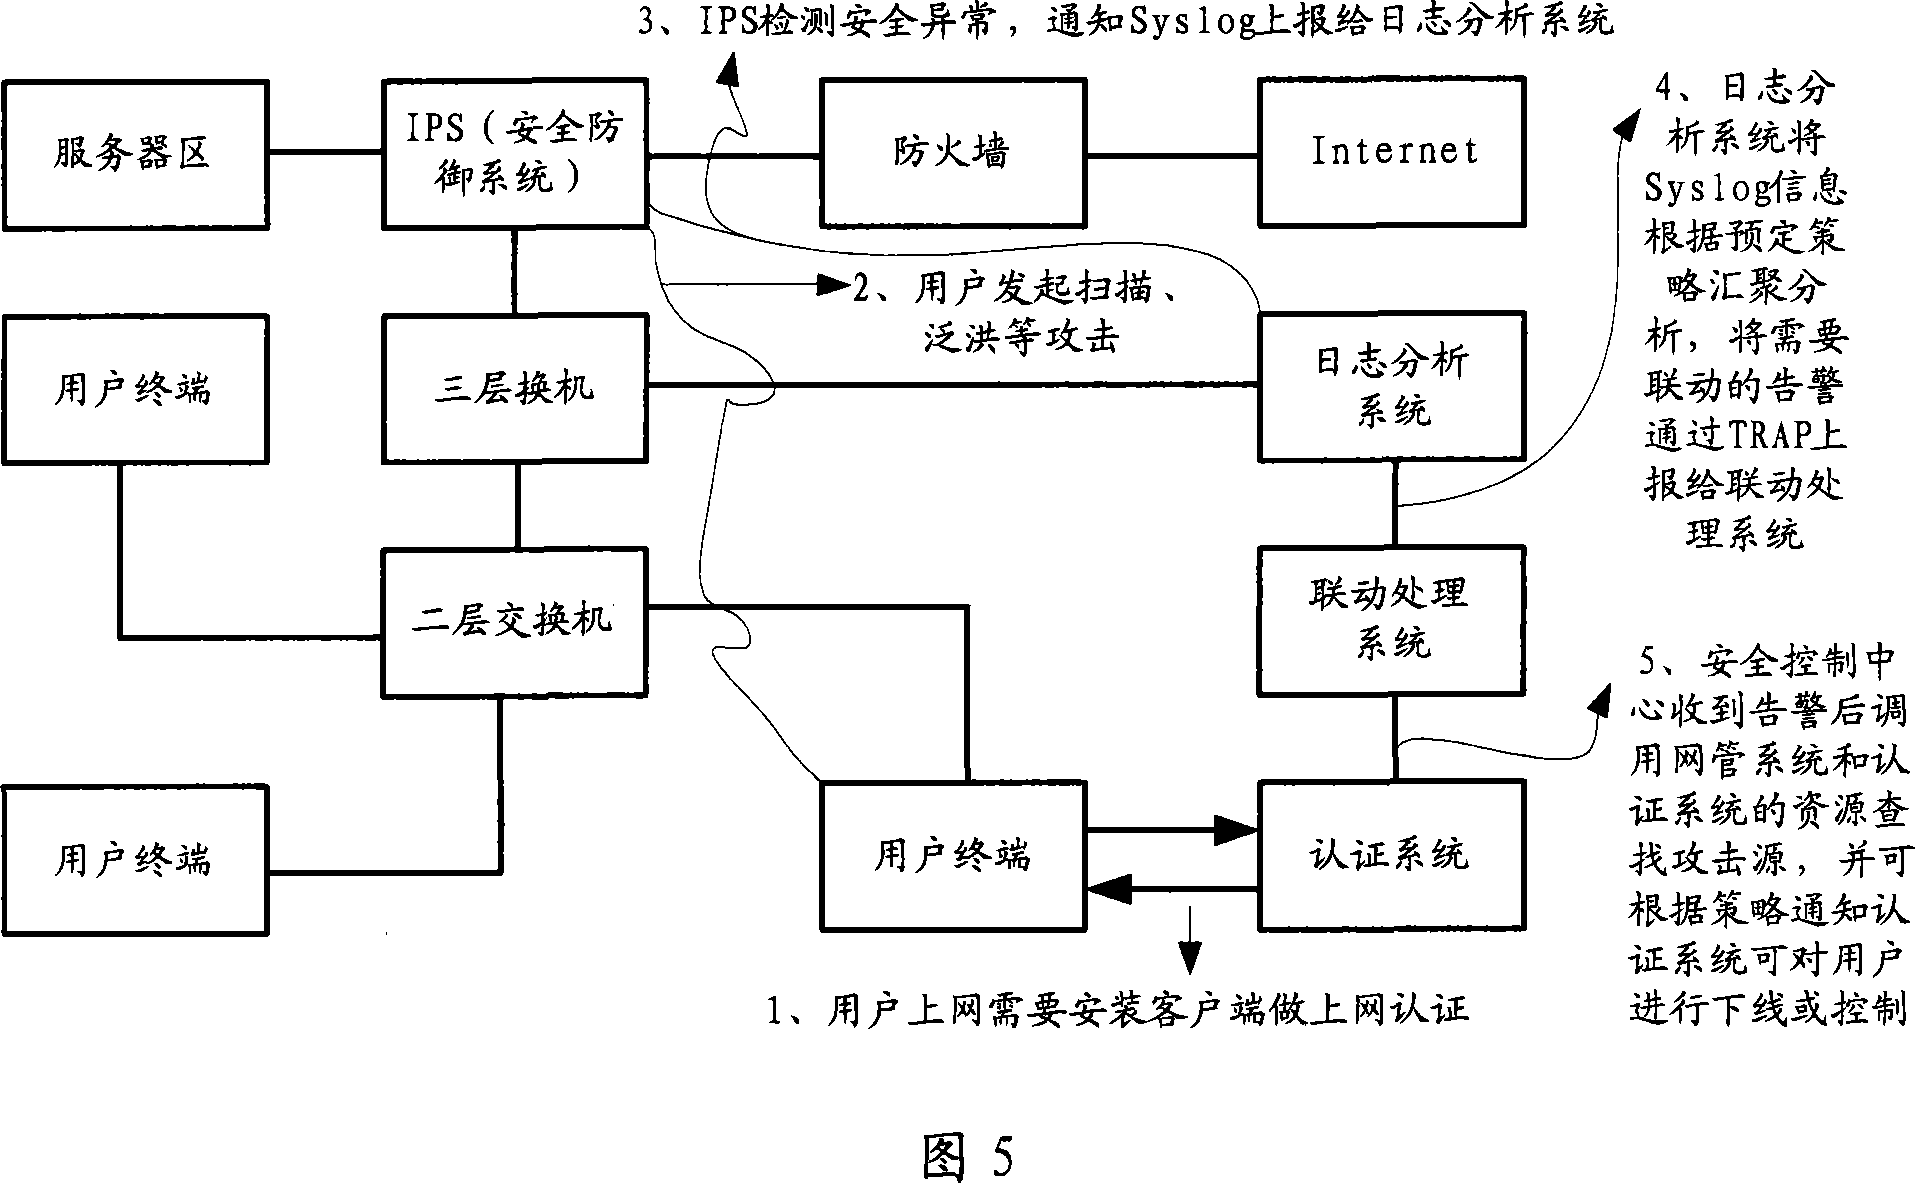 A device and method for secure information joint processing